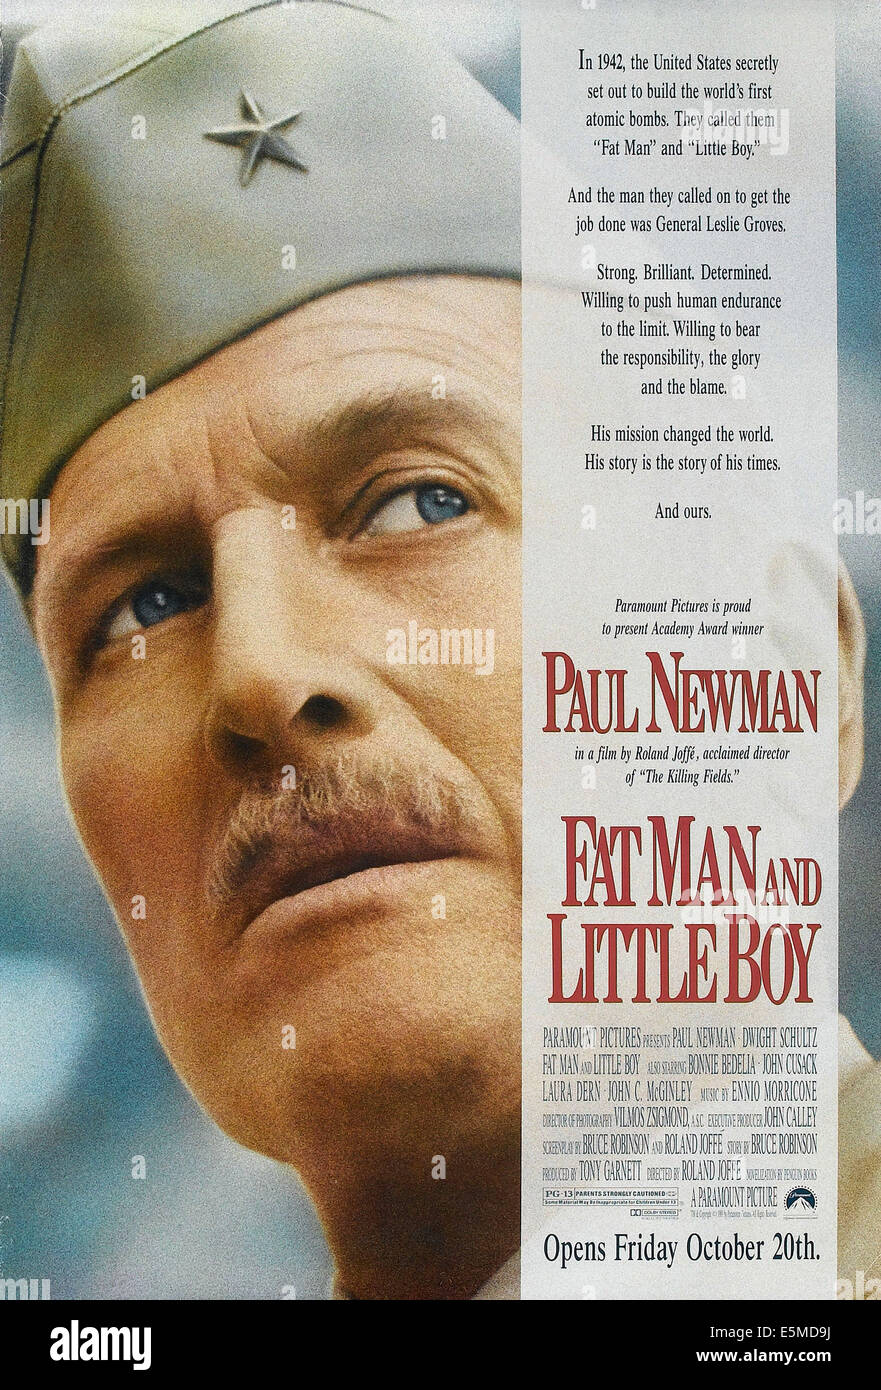 FAT MAN AND LITTLE BOY, US advance poster art, Paul Newman, 1989. ©Paramount/courtesy Everett Collection Stock Photo